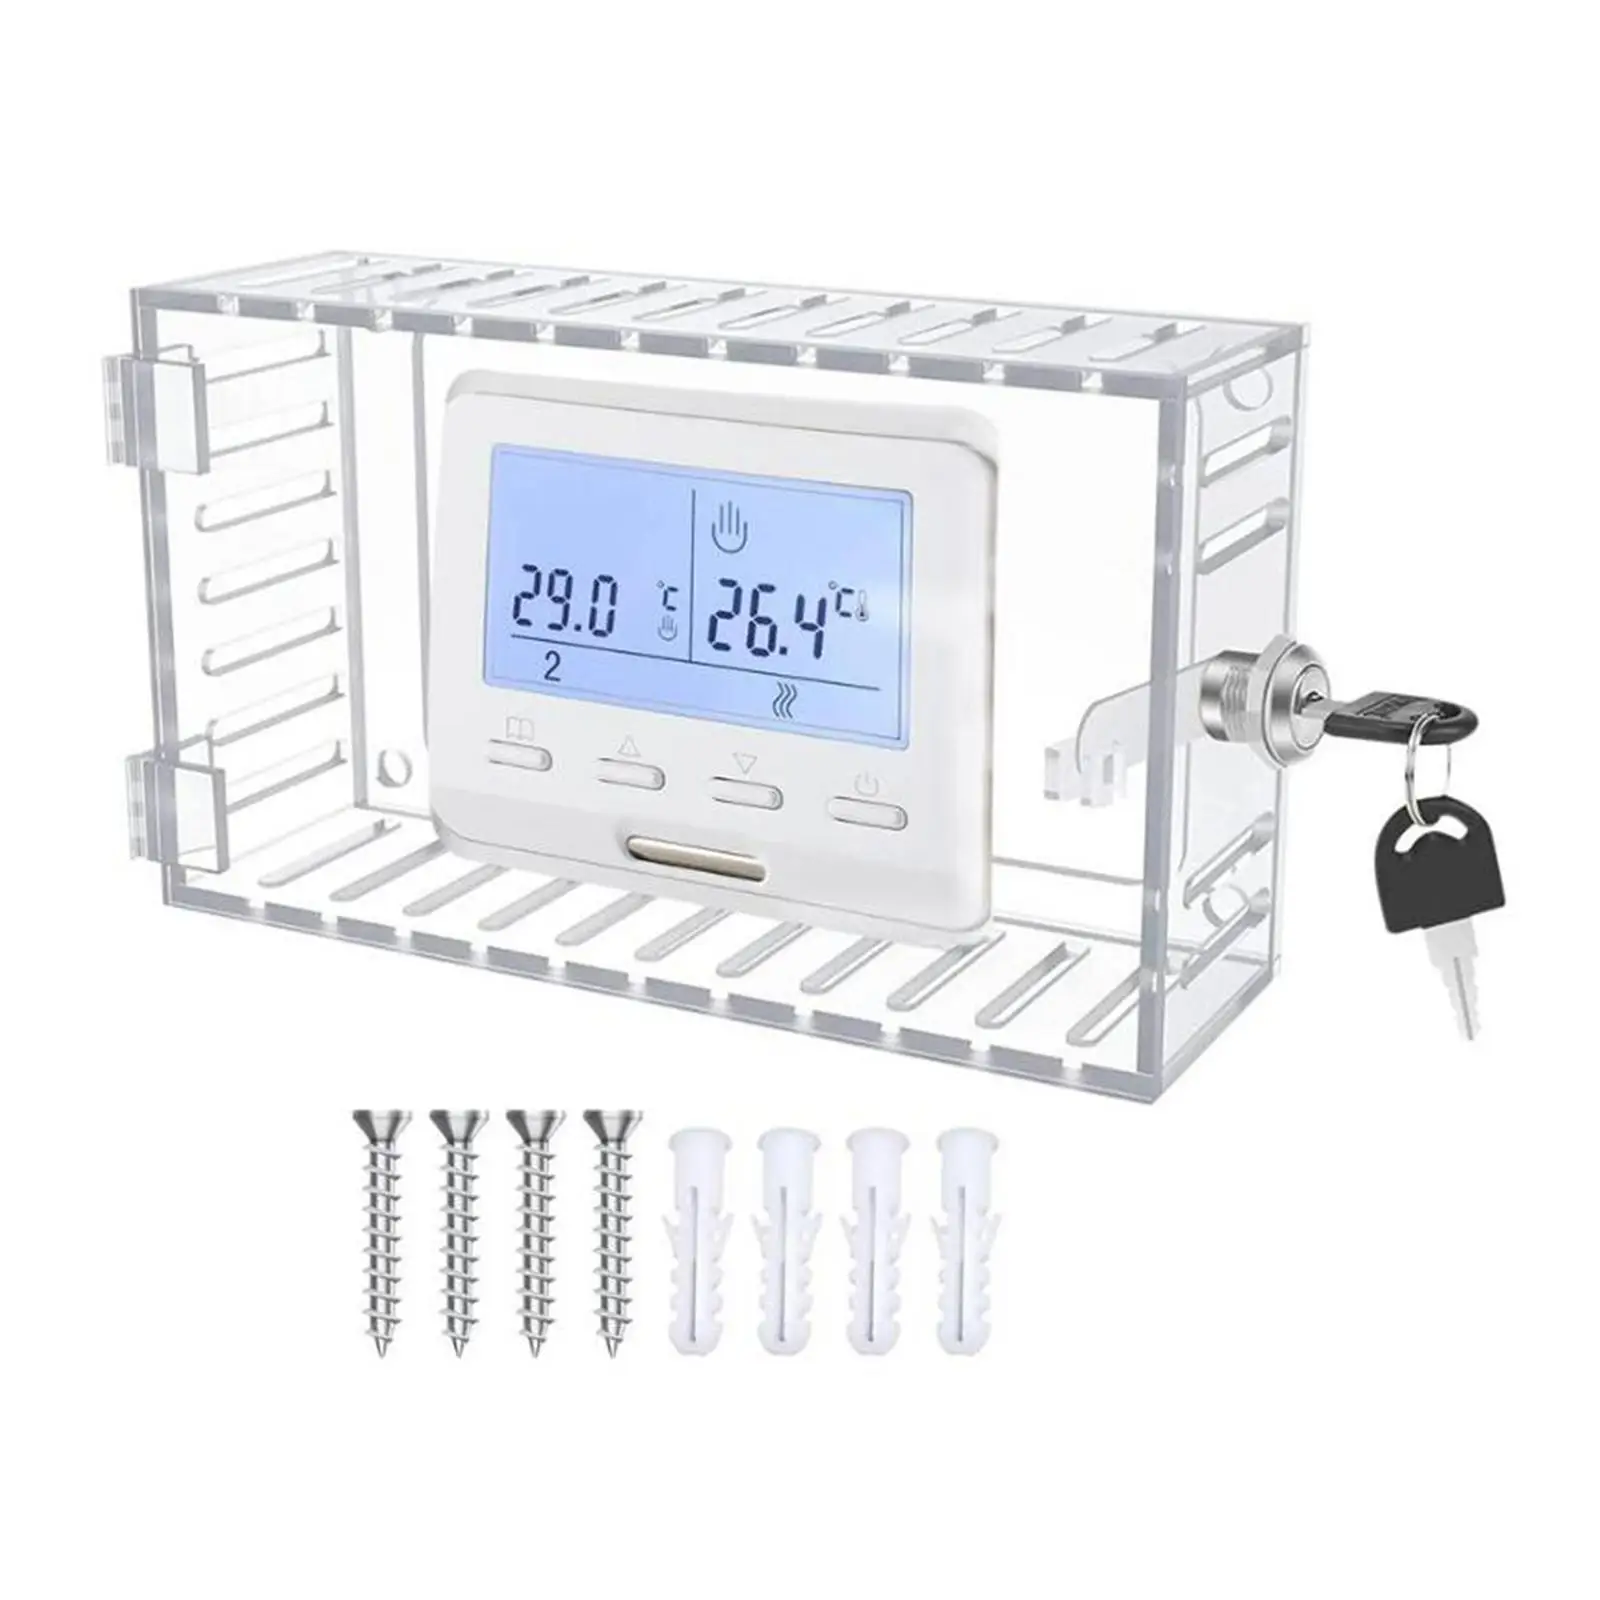 Thermostat Lock Box with Key 7.28 ``x 4.72``x 2.20`` Wall A/C Panels Lock Box Thermostat Guard for Office Restaurants Public